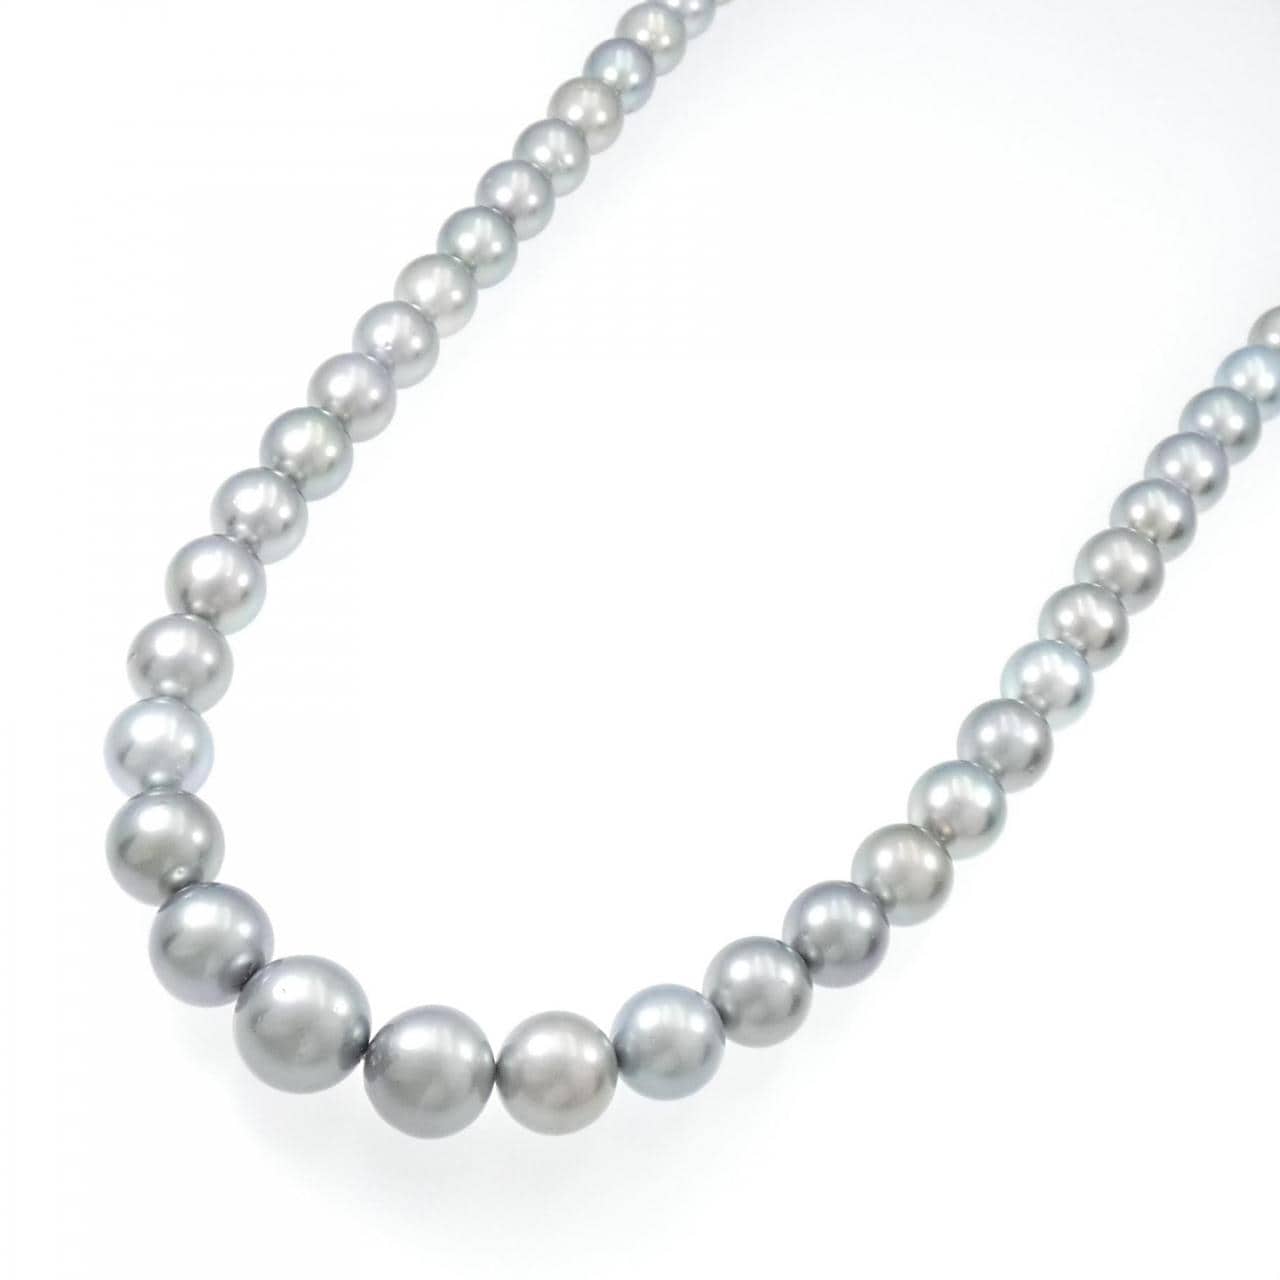 Silver clasp black butterfly pearl necklace 11-14.4mm